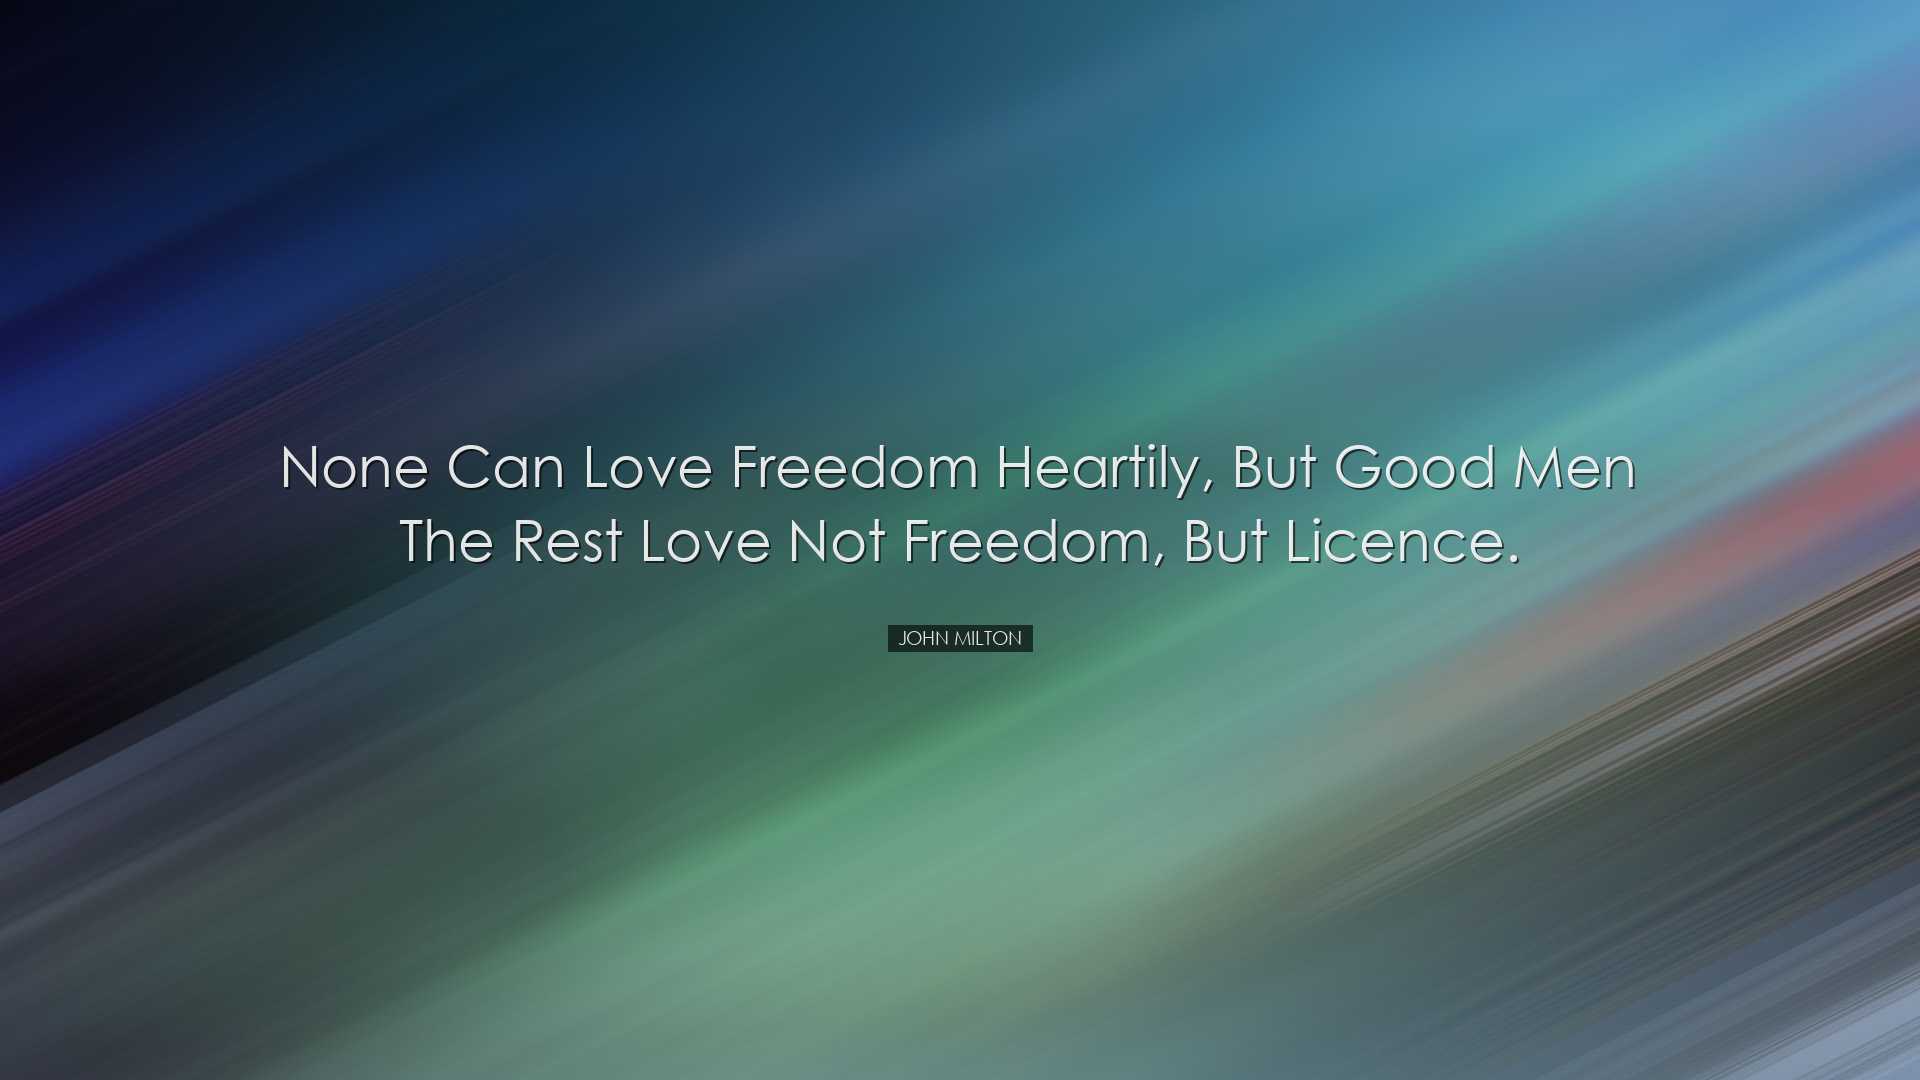 None can love freedom heartily, but good men the rest love not fre